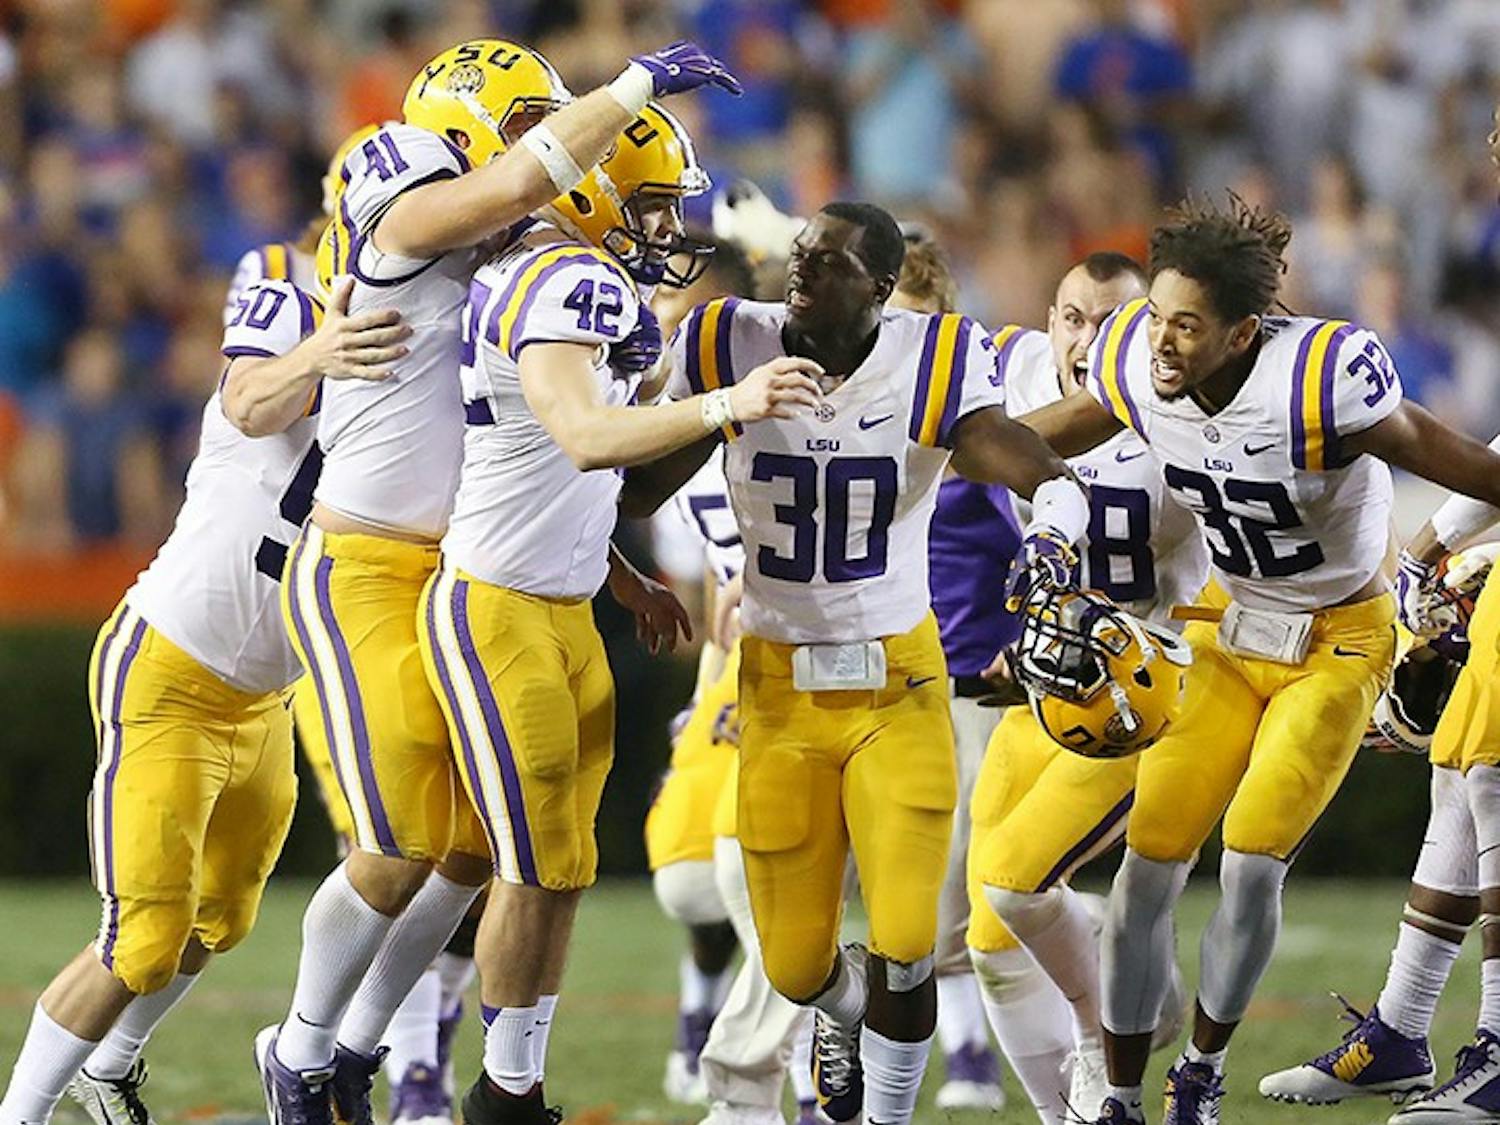 LSU players mob kicker Colby Delahoussaye (42) after he kicked a last-second 50-yard field goal against Florida at Ben Hill Griffin Stadium in Gainesville, Fla., on Saturday, Oct. 11, 2014. LSU won, 30-27. (Stephen M. Dowell/Orlando Sentinel/MCT)